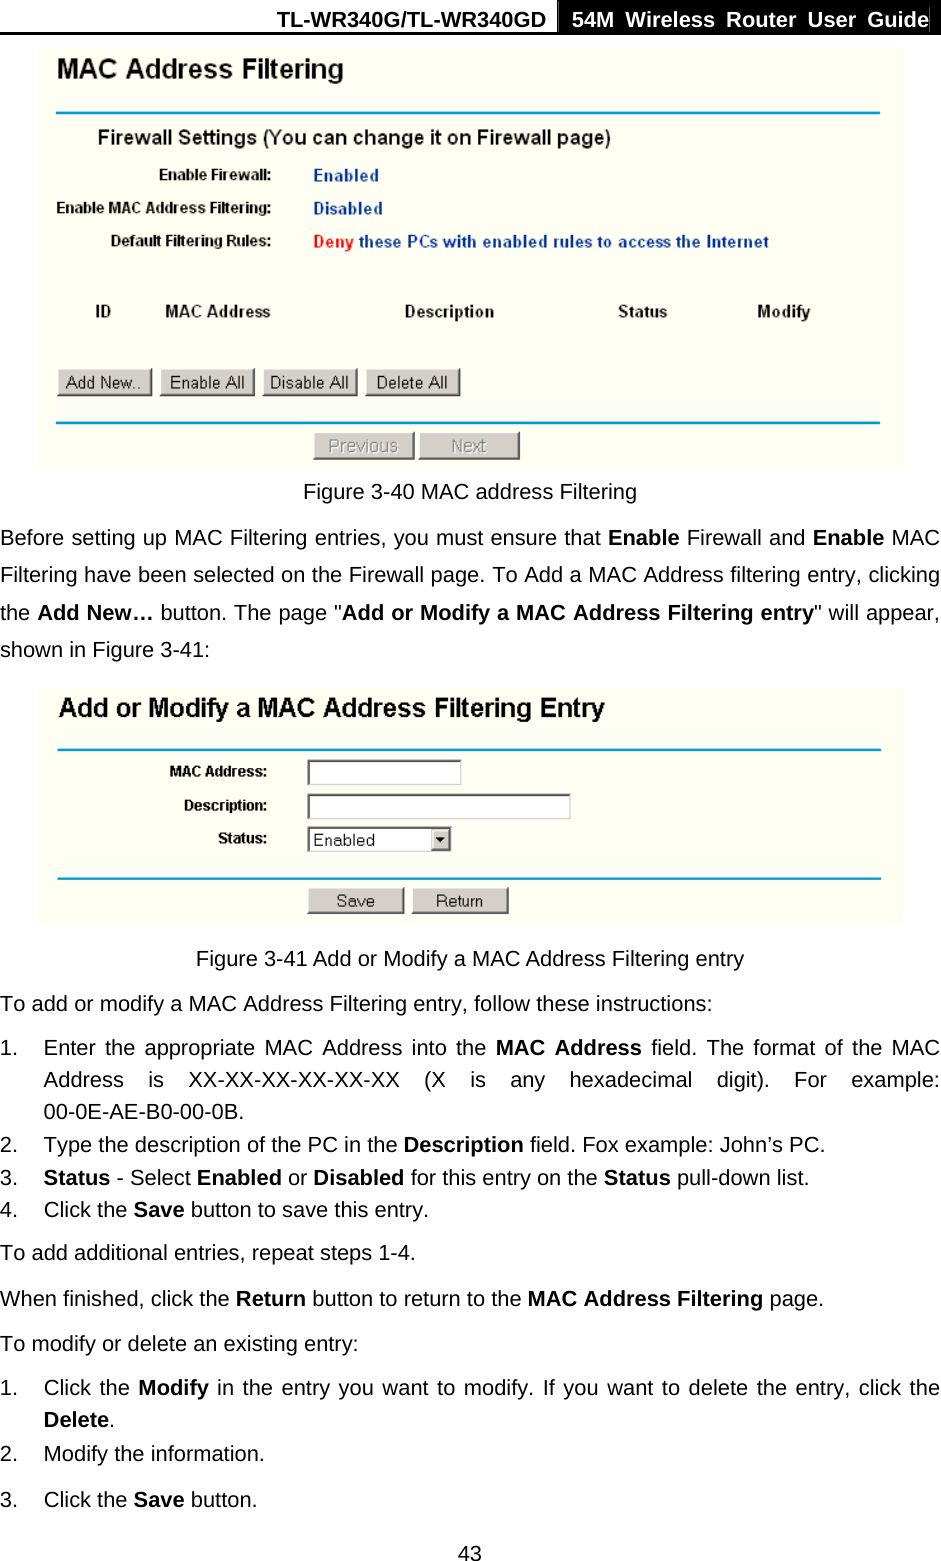 TL-WR340G/TL-WR340GD 54M Wireless Router User Guide  43 Figure 3-40 MAC address Filtering Before setting up MAC Filtering entries, you must ensure that Enable Firewall and Enable MAC Filtering have been selected on the Firewall page. To Add a MAC Address filtering entry, clicking the Add New… button. The page &quot;Add or Modify a MAC Address Filtering entry&quot; will appear, shown in Figure 3-41:    Figure 3-41 Add or Modify a MAC Address Filtering entry To add or modify a MAC Address Filtering entry, follow these instructions: 1.  Enter the appropriate MAC Address into the MAC Address field. The format of the MAC Address is XX-XX-XX-XX-XX-XX (X is any hexadecimal digit). For example: 00-0E-AE-B0-00-0B. 2.  Type the description of the PC in the Description field. Fox example: John’s PC. 3.  Status - Select Enabled or Disabled for this entry on the Status pull-down list. 4. Click the Save button to save this entry. To add additional entries, repeat steps 1-4. When finished, click the Return button to return to the MAC Address Filtering page. To modify or delete an existing entry: 1. Click the Modify in the entry you want to modify. If you want to delete the entry, click the Delete. 2.  Modify the information.   3. Click the Save button. 